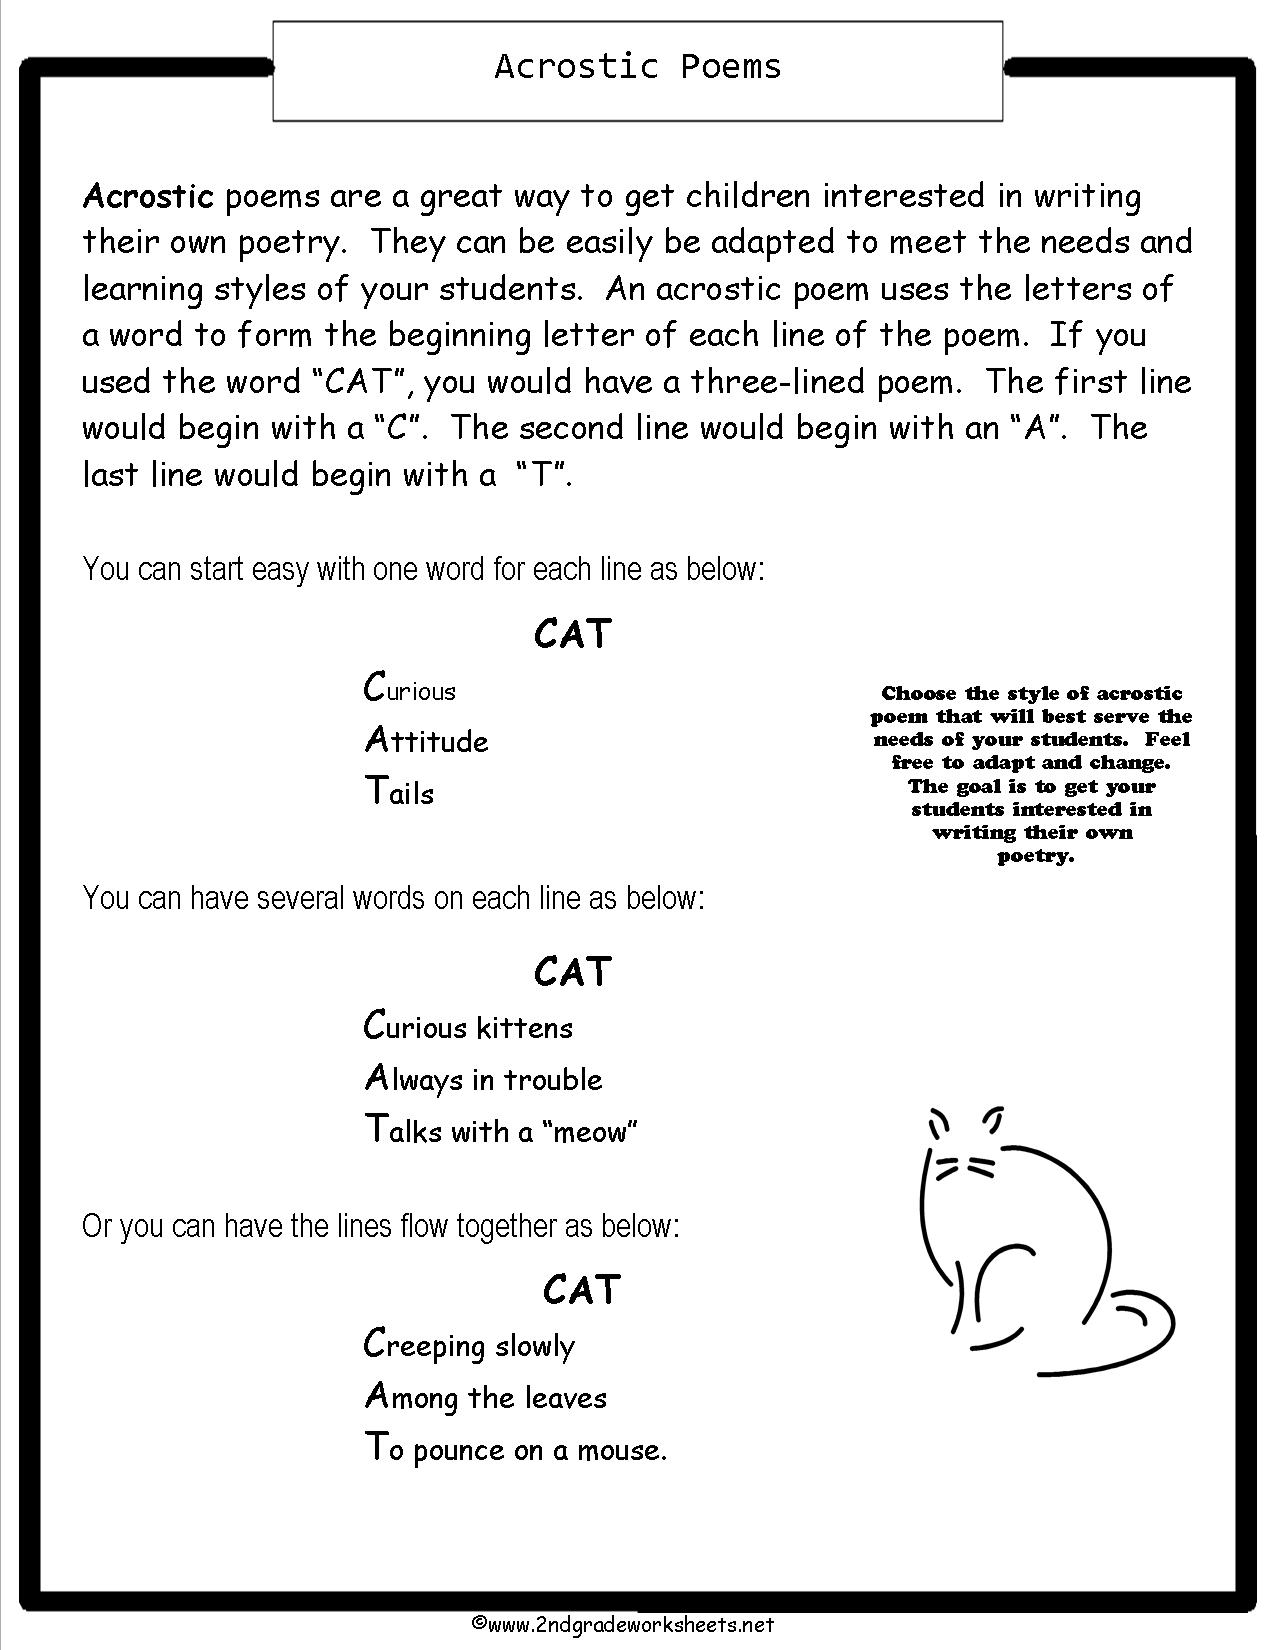 acrostic-poem-forms-templates-and-worksheets